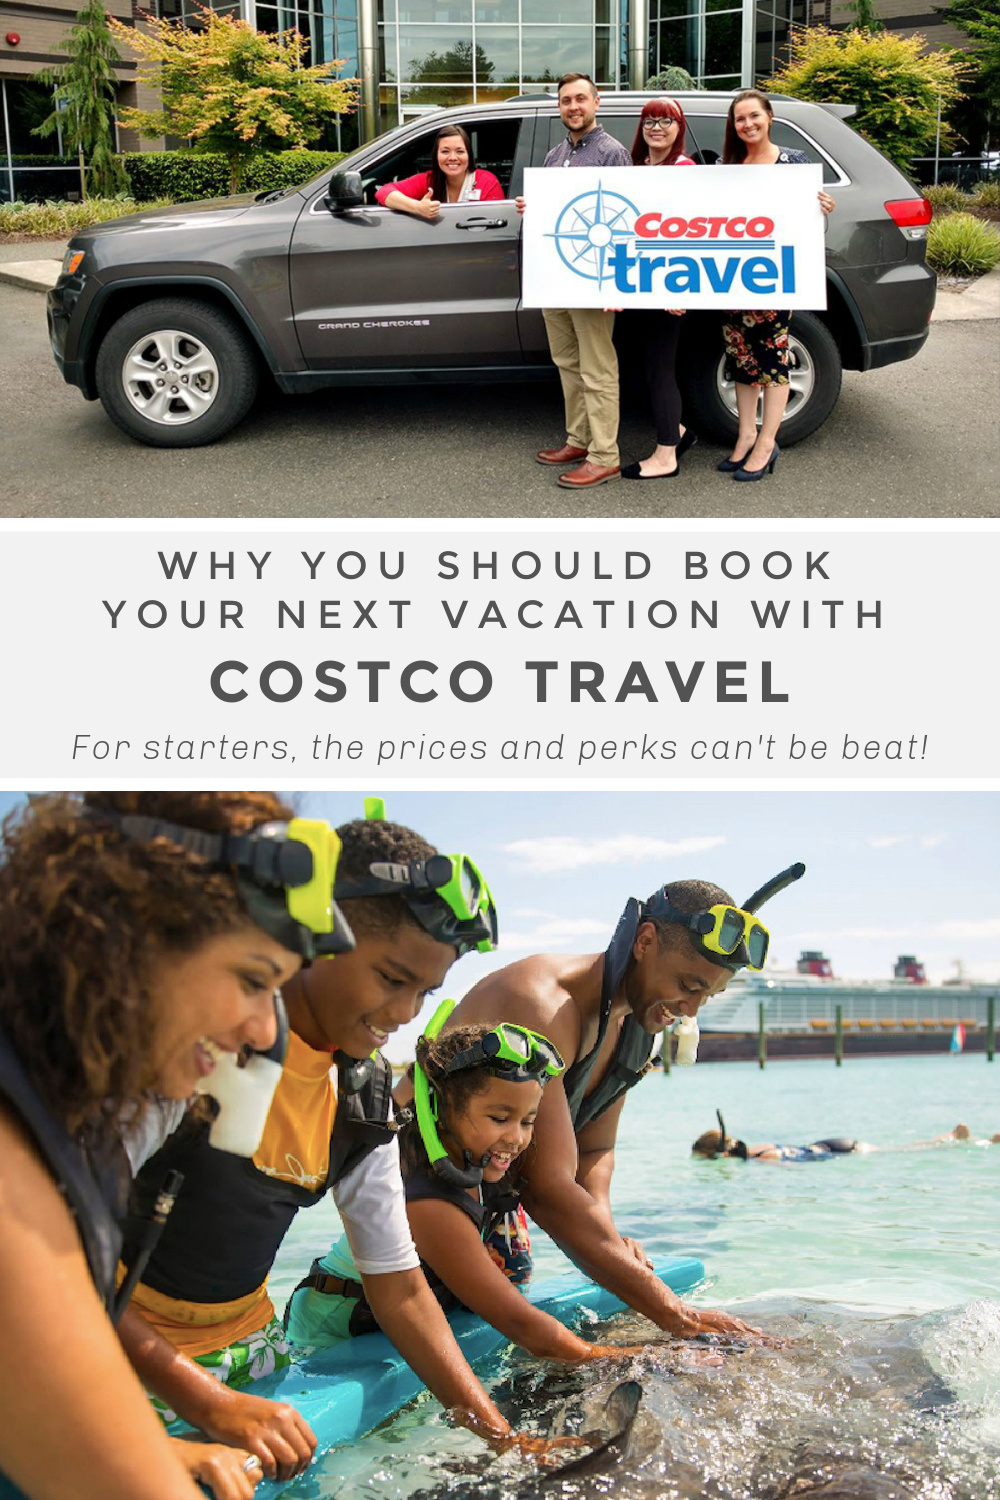 I Used Costco Travel Car Rental Deals & Saved An Extra $150!